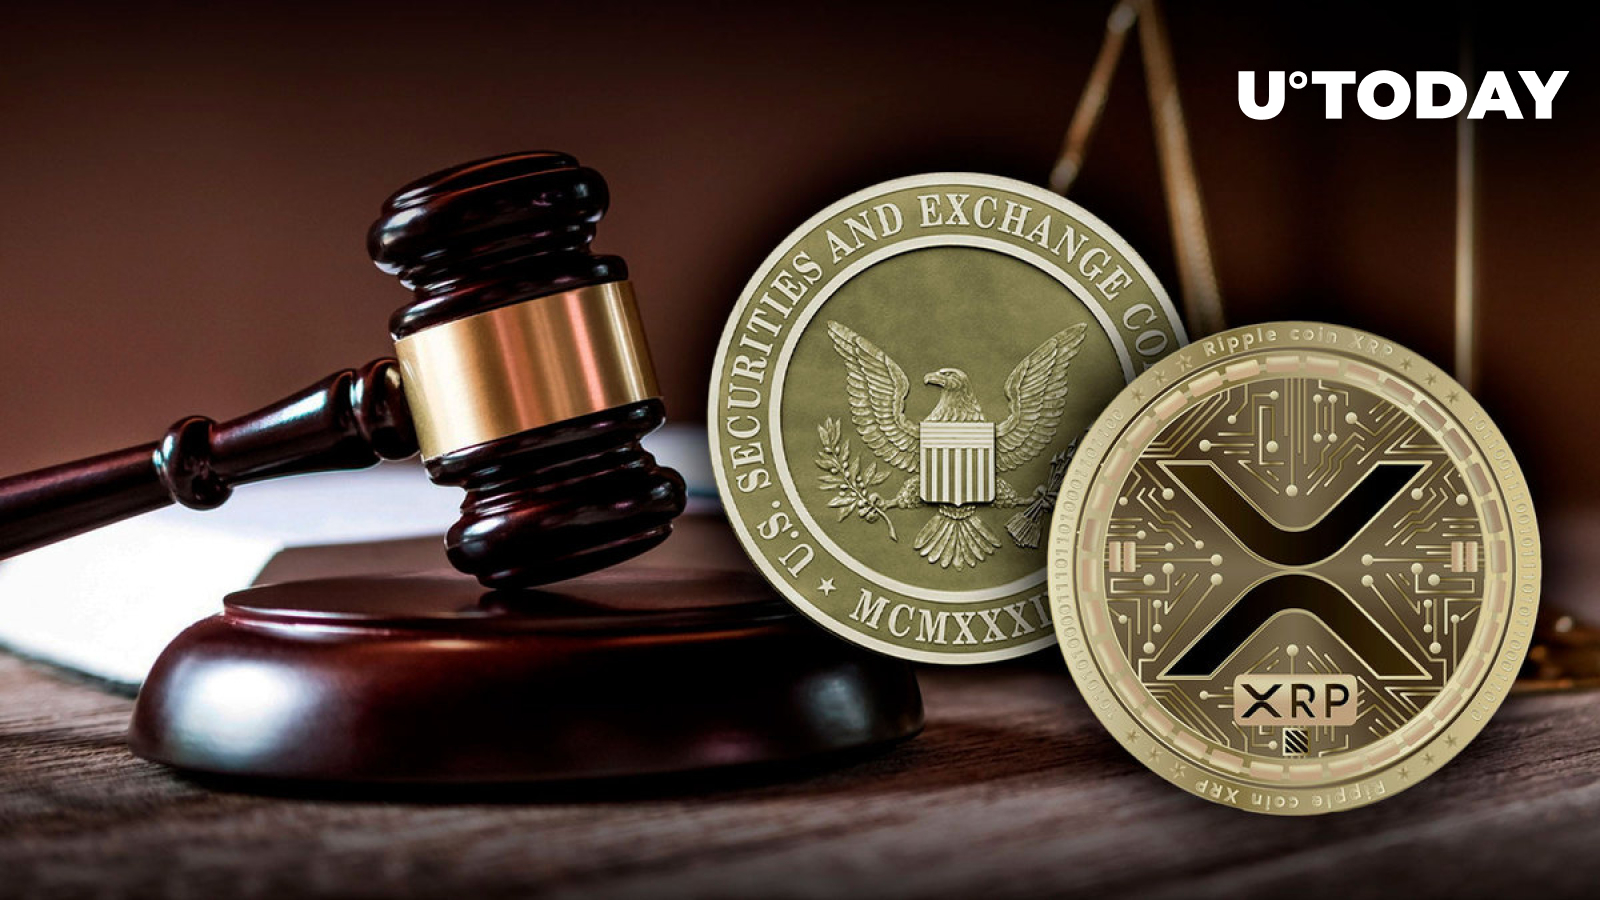 XRP Holders’ Lawyer Reveals How Firms Should Deal With SEC